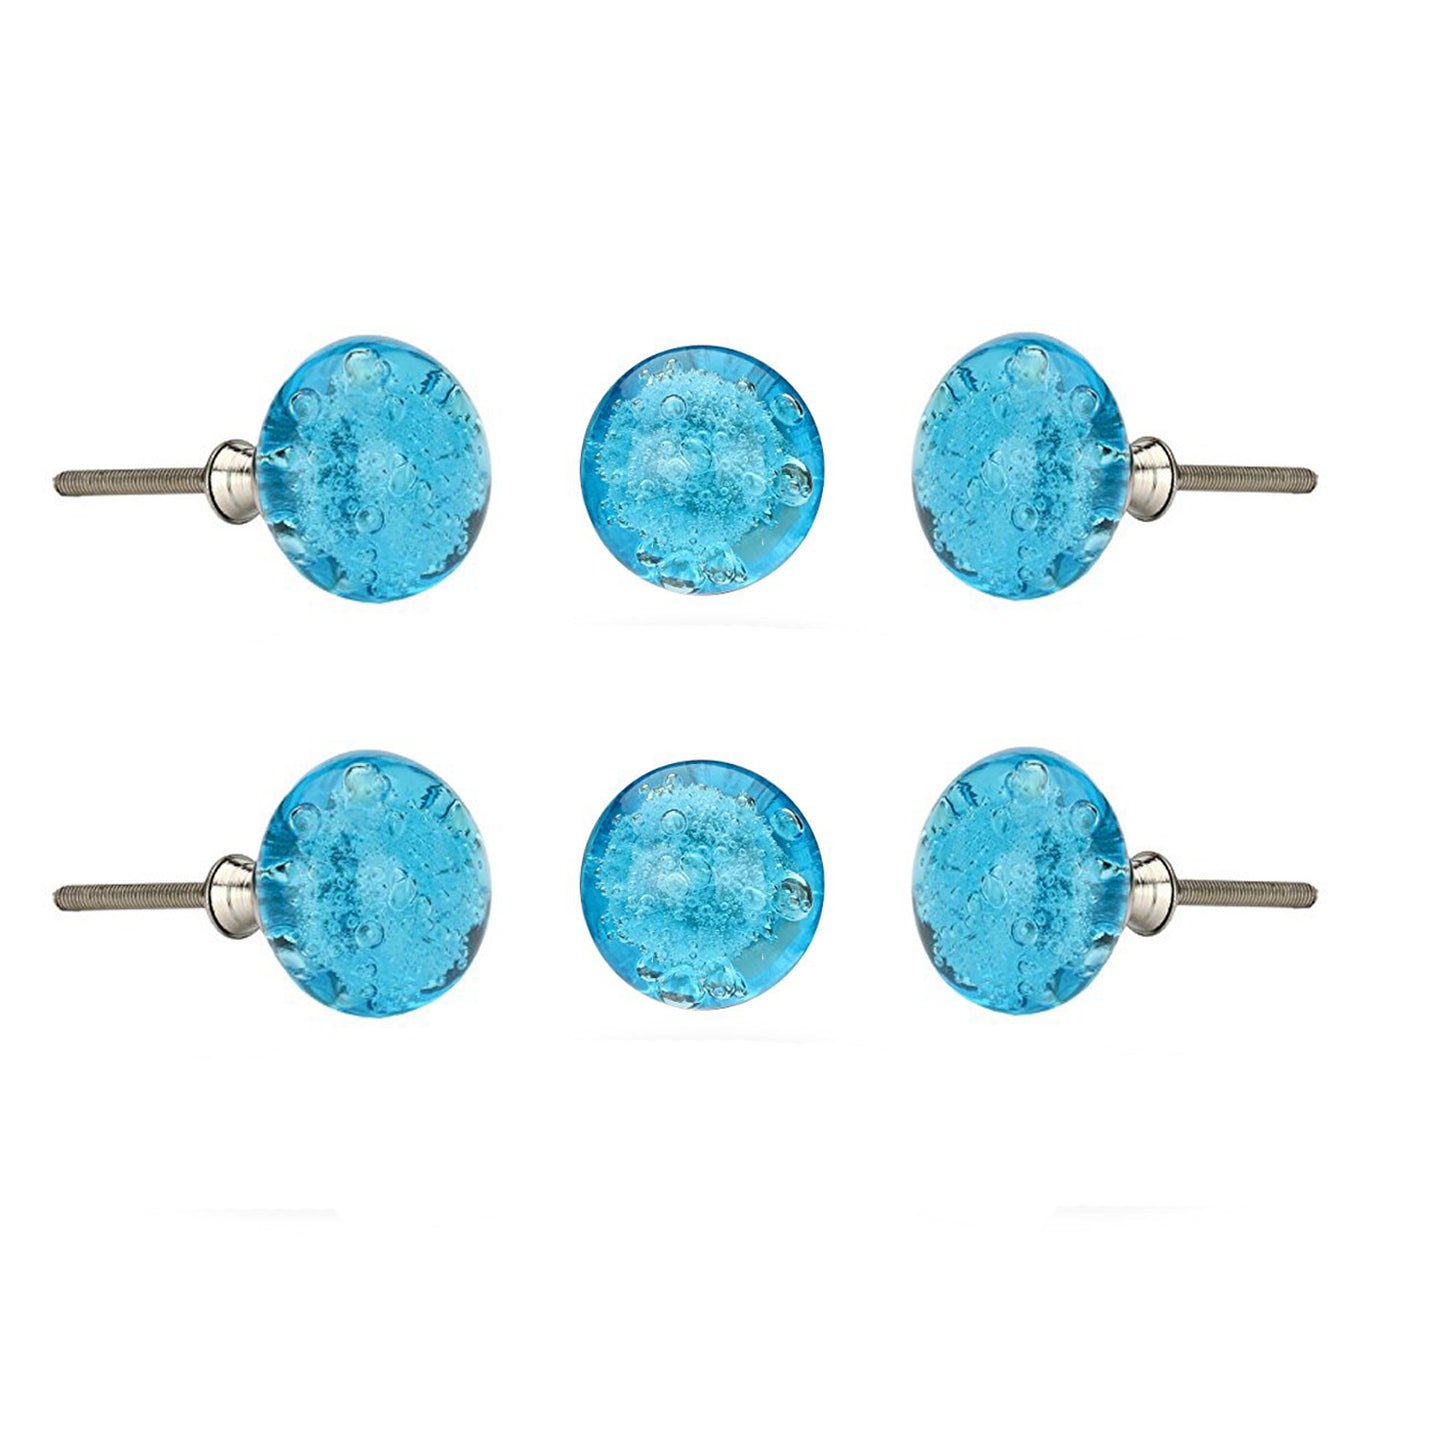 Set of 6 Turquoise Glass Bubble Knobs